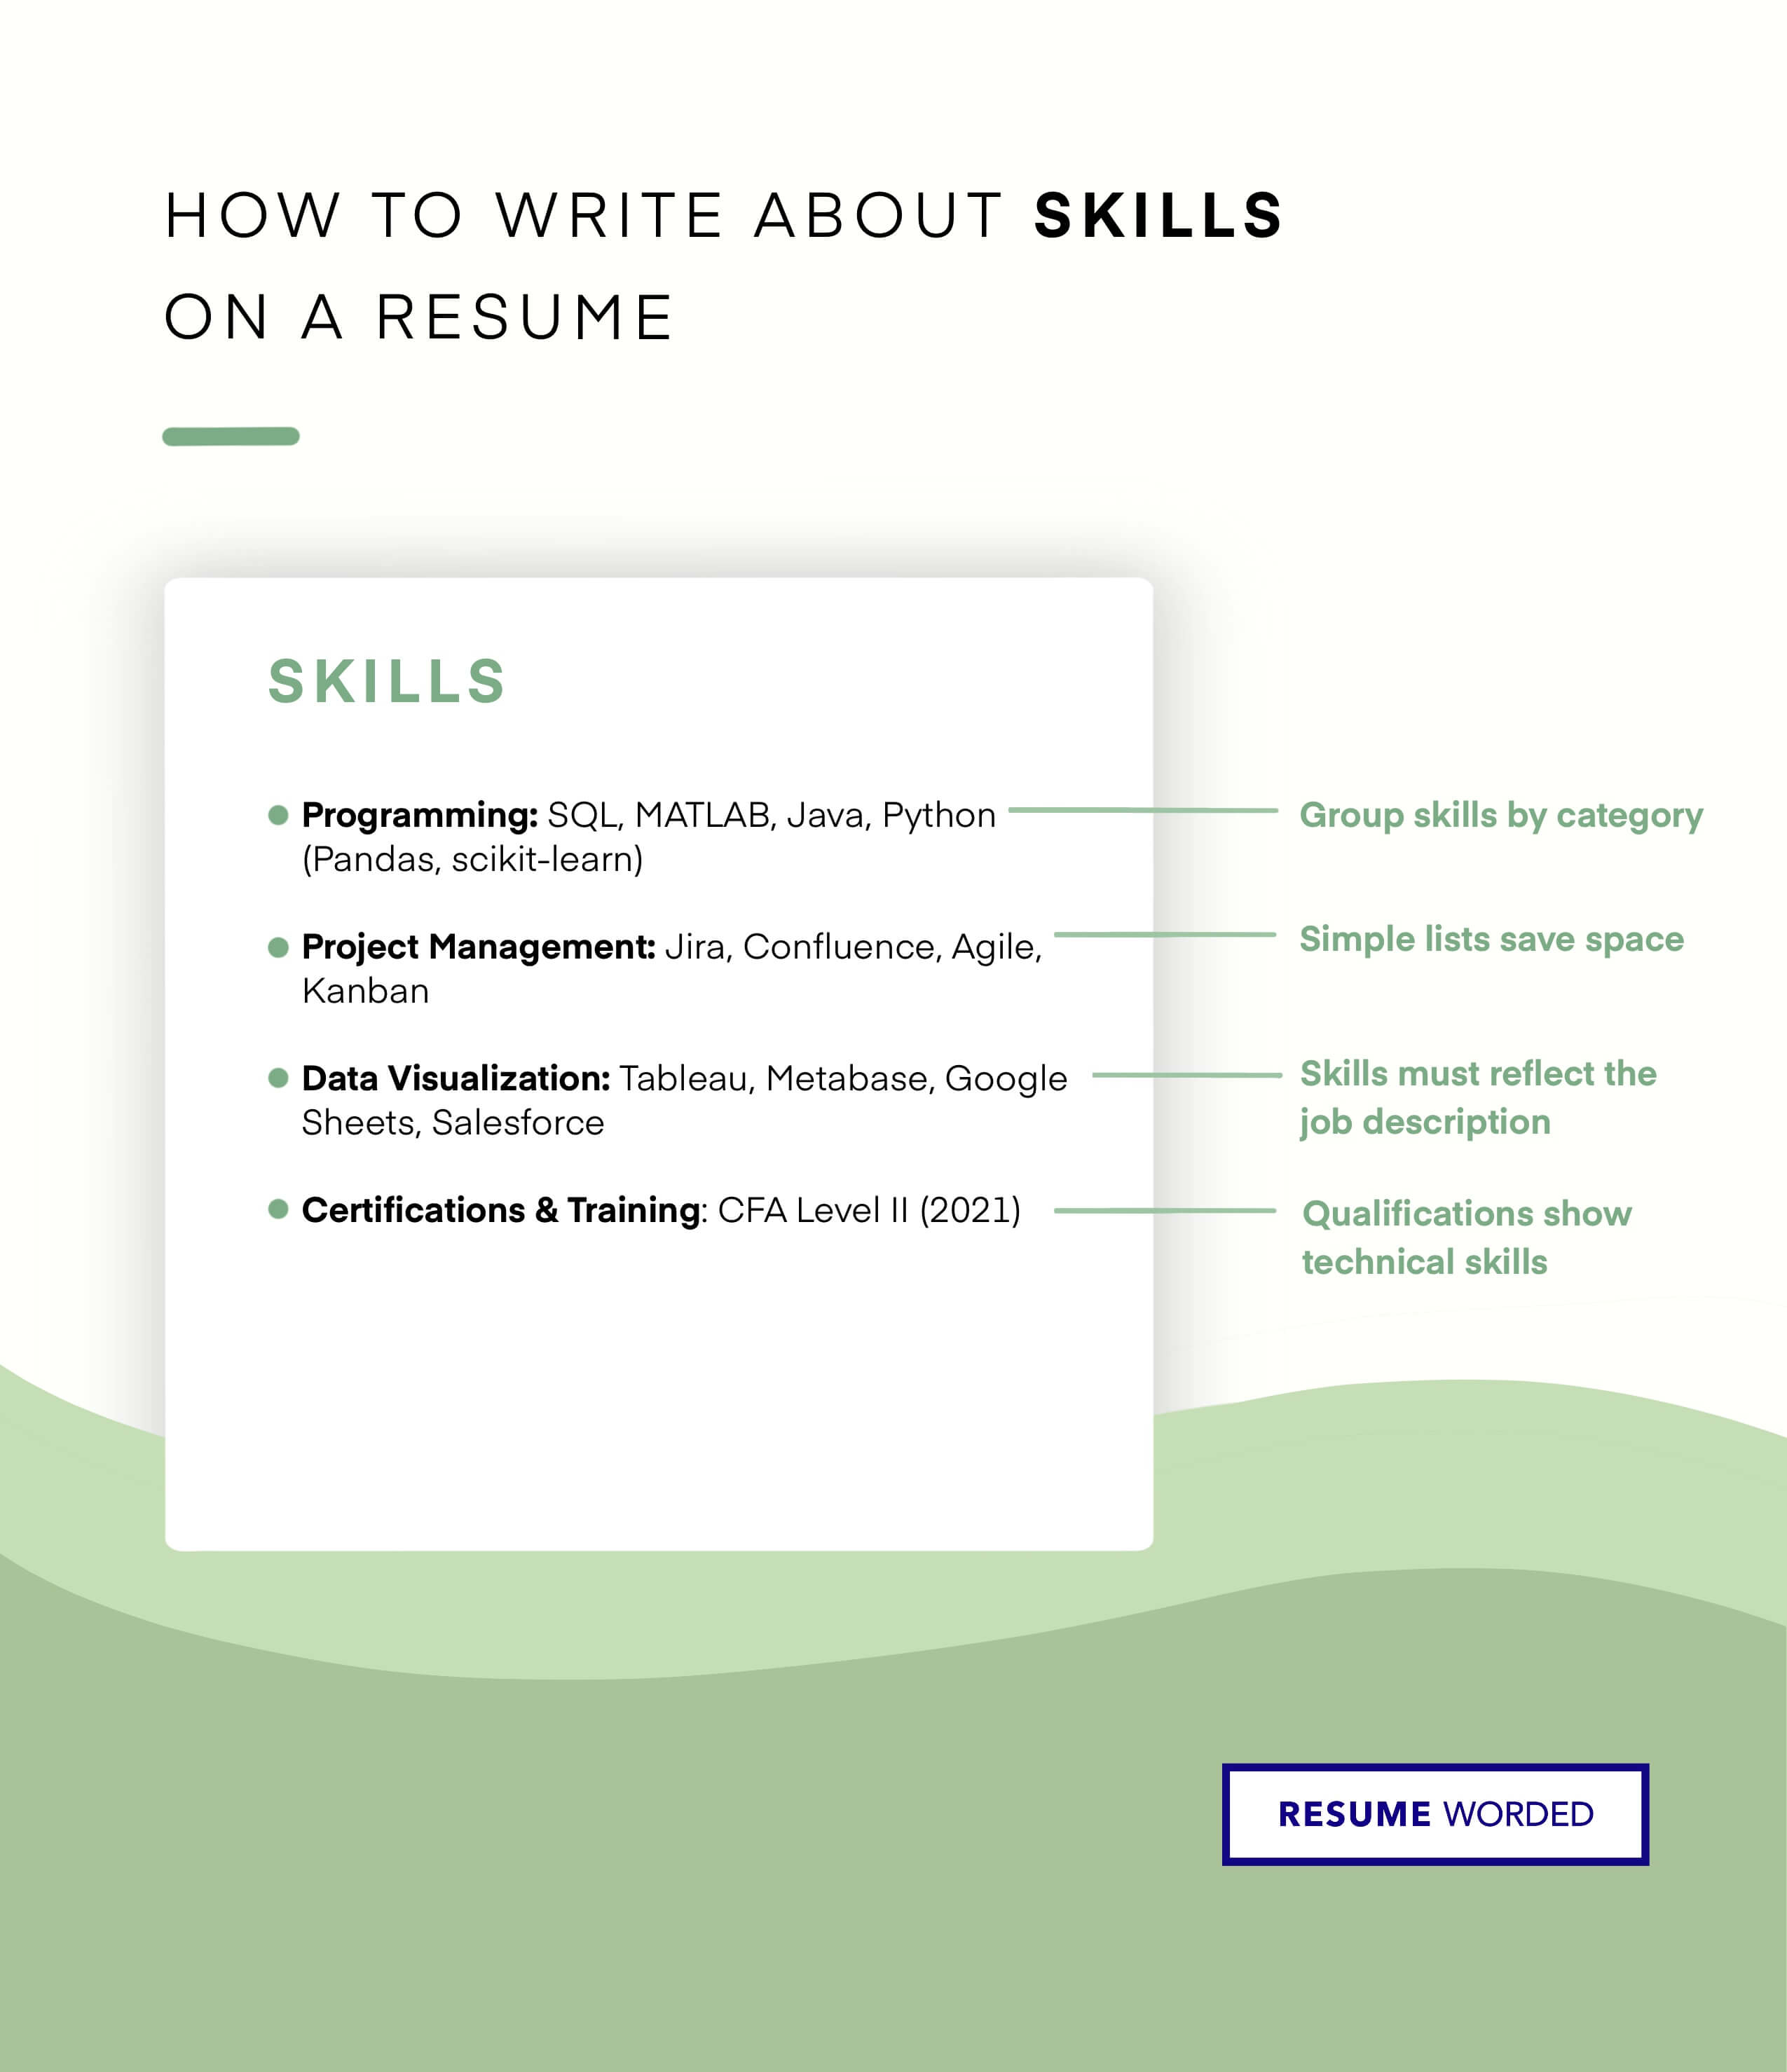 How to write about skills on resume